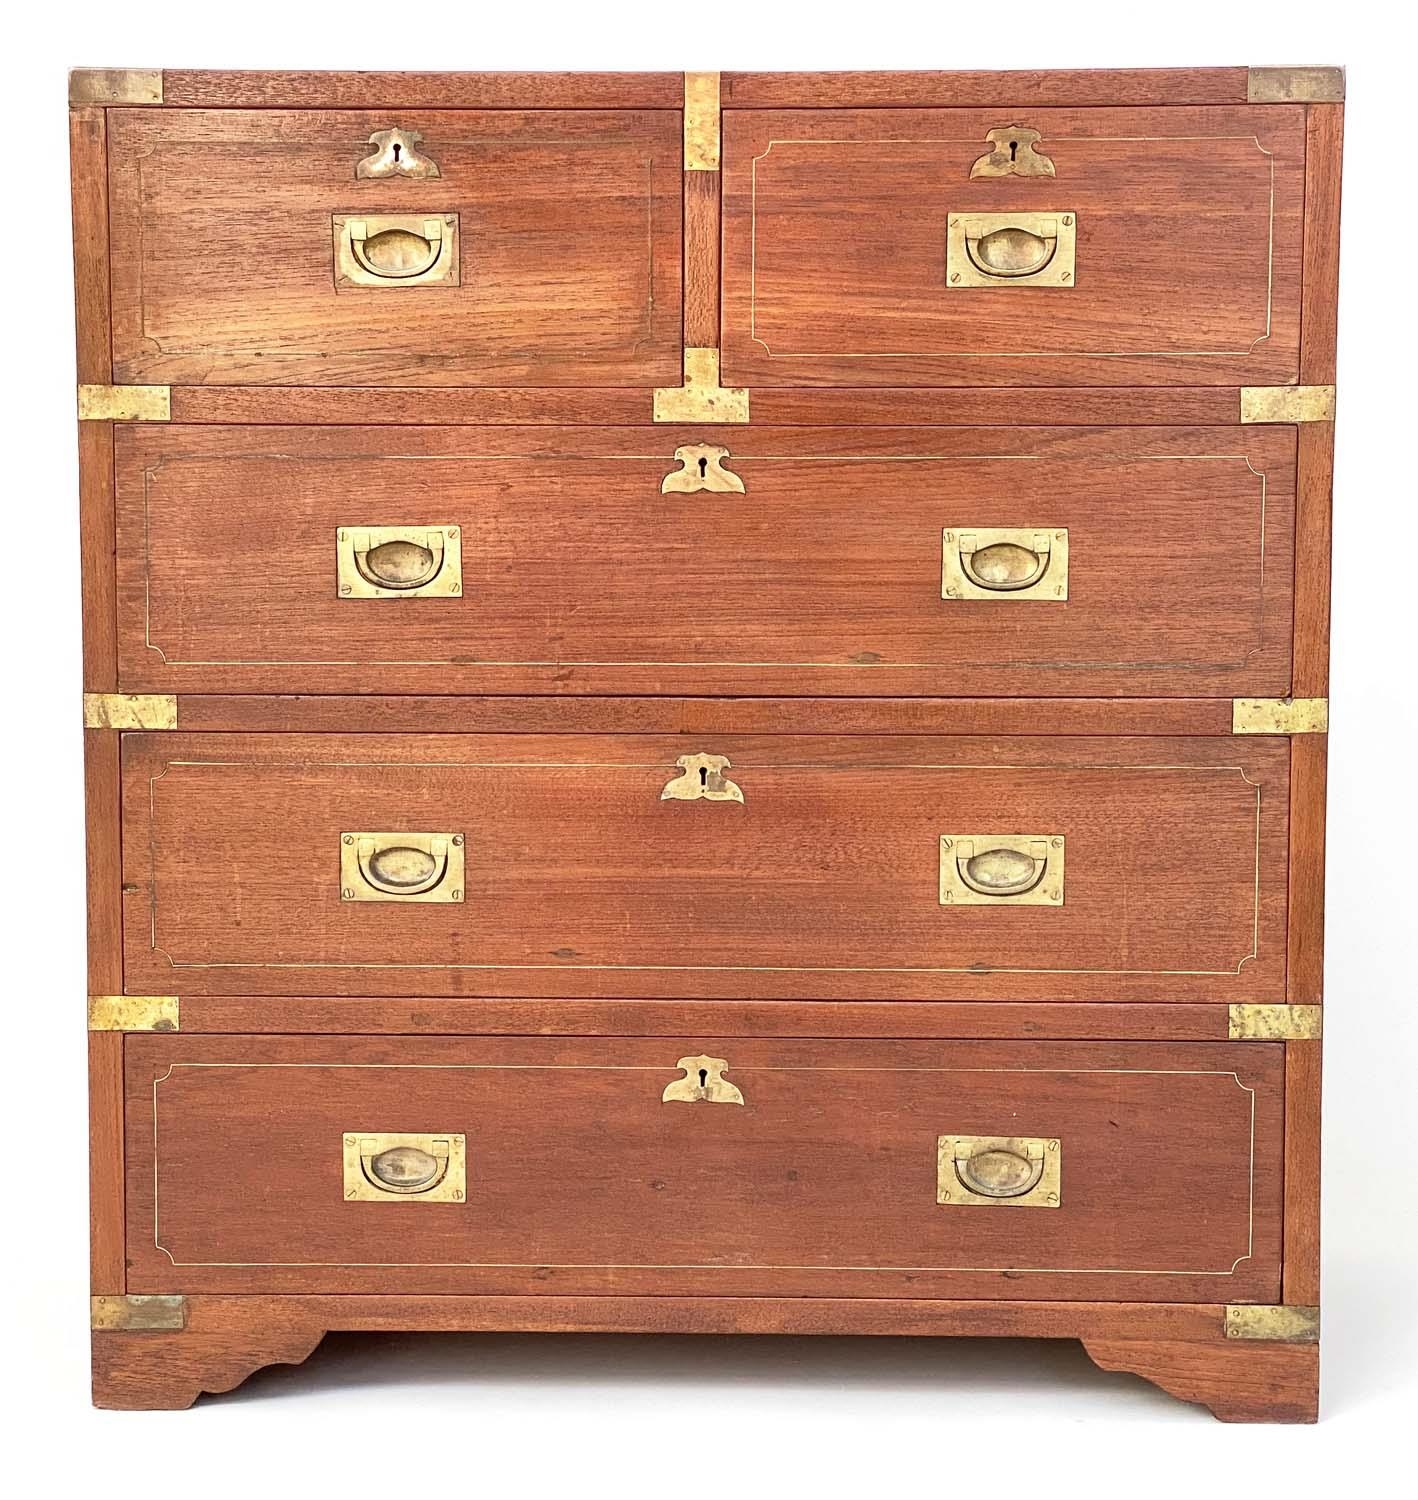 CAMPAIGN STYLE CHEST, mid 20th century Indian, teak and brass bound with two short and three long